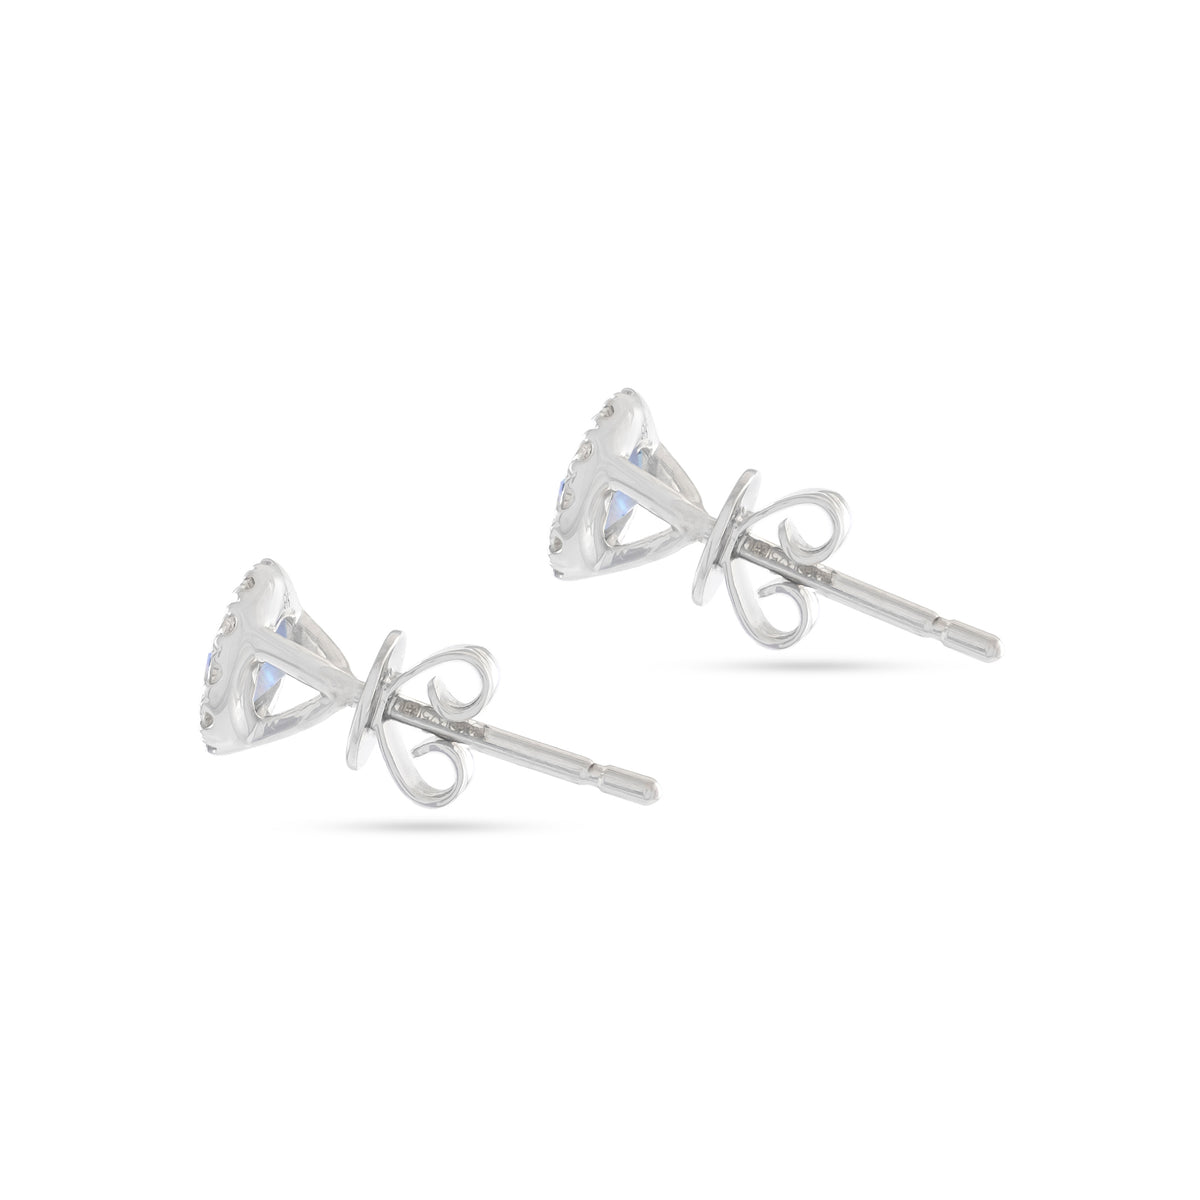 9ct White Gold Moonstone and Diamond Halo Stud Earrings